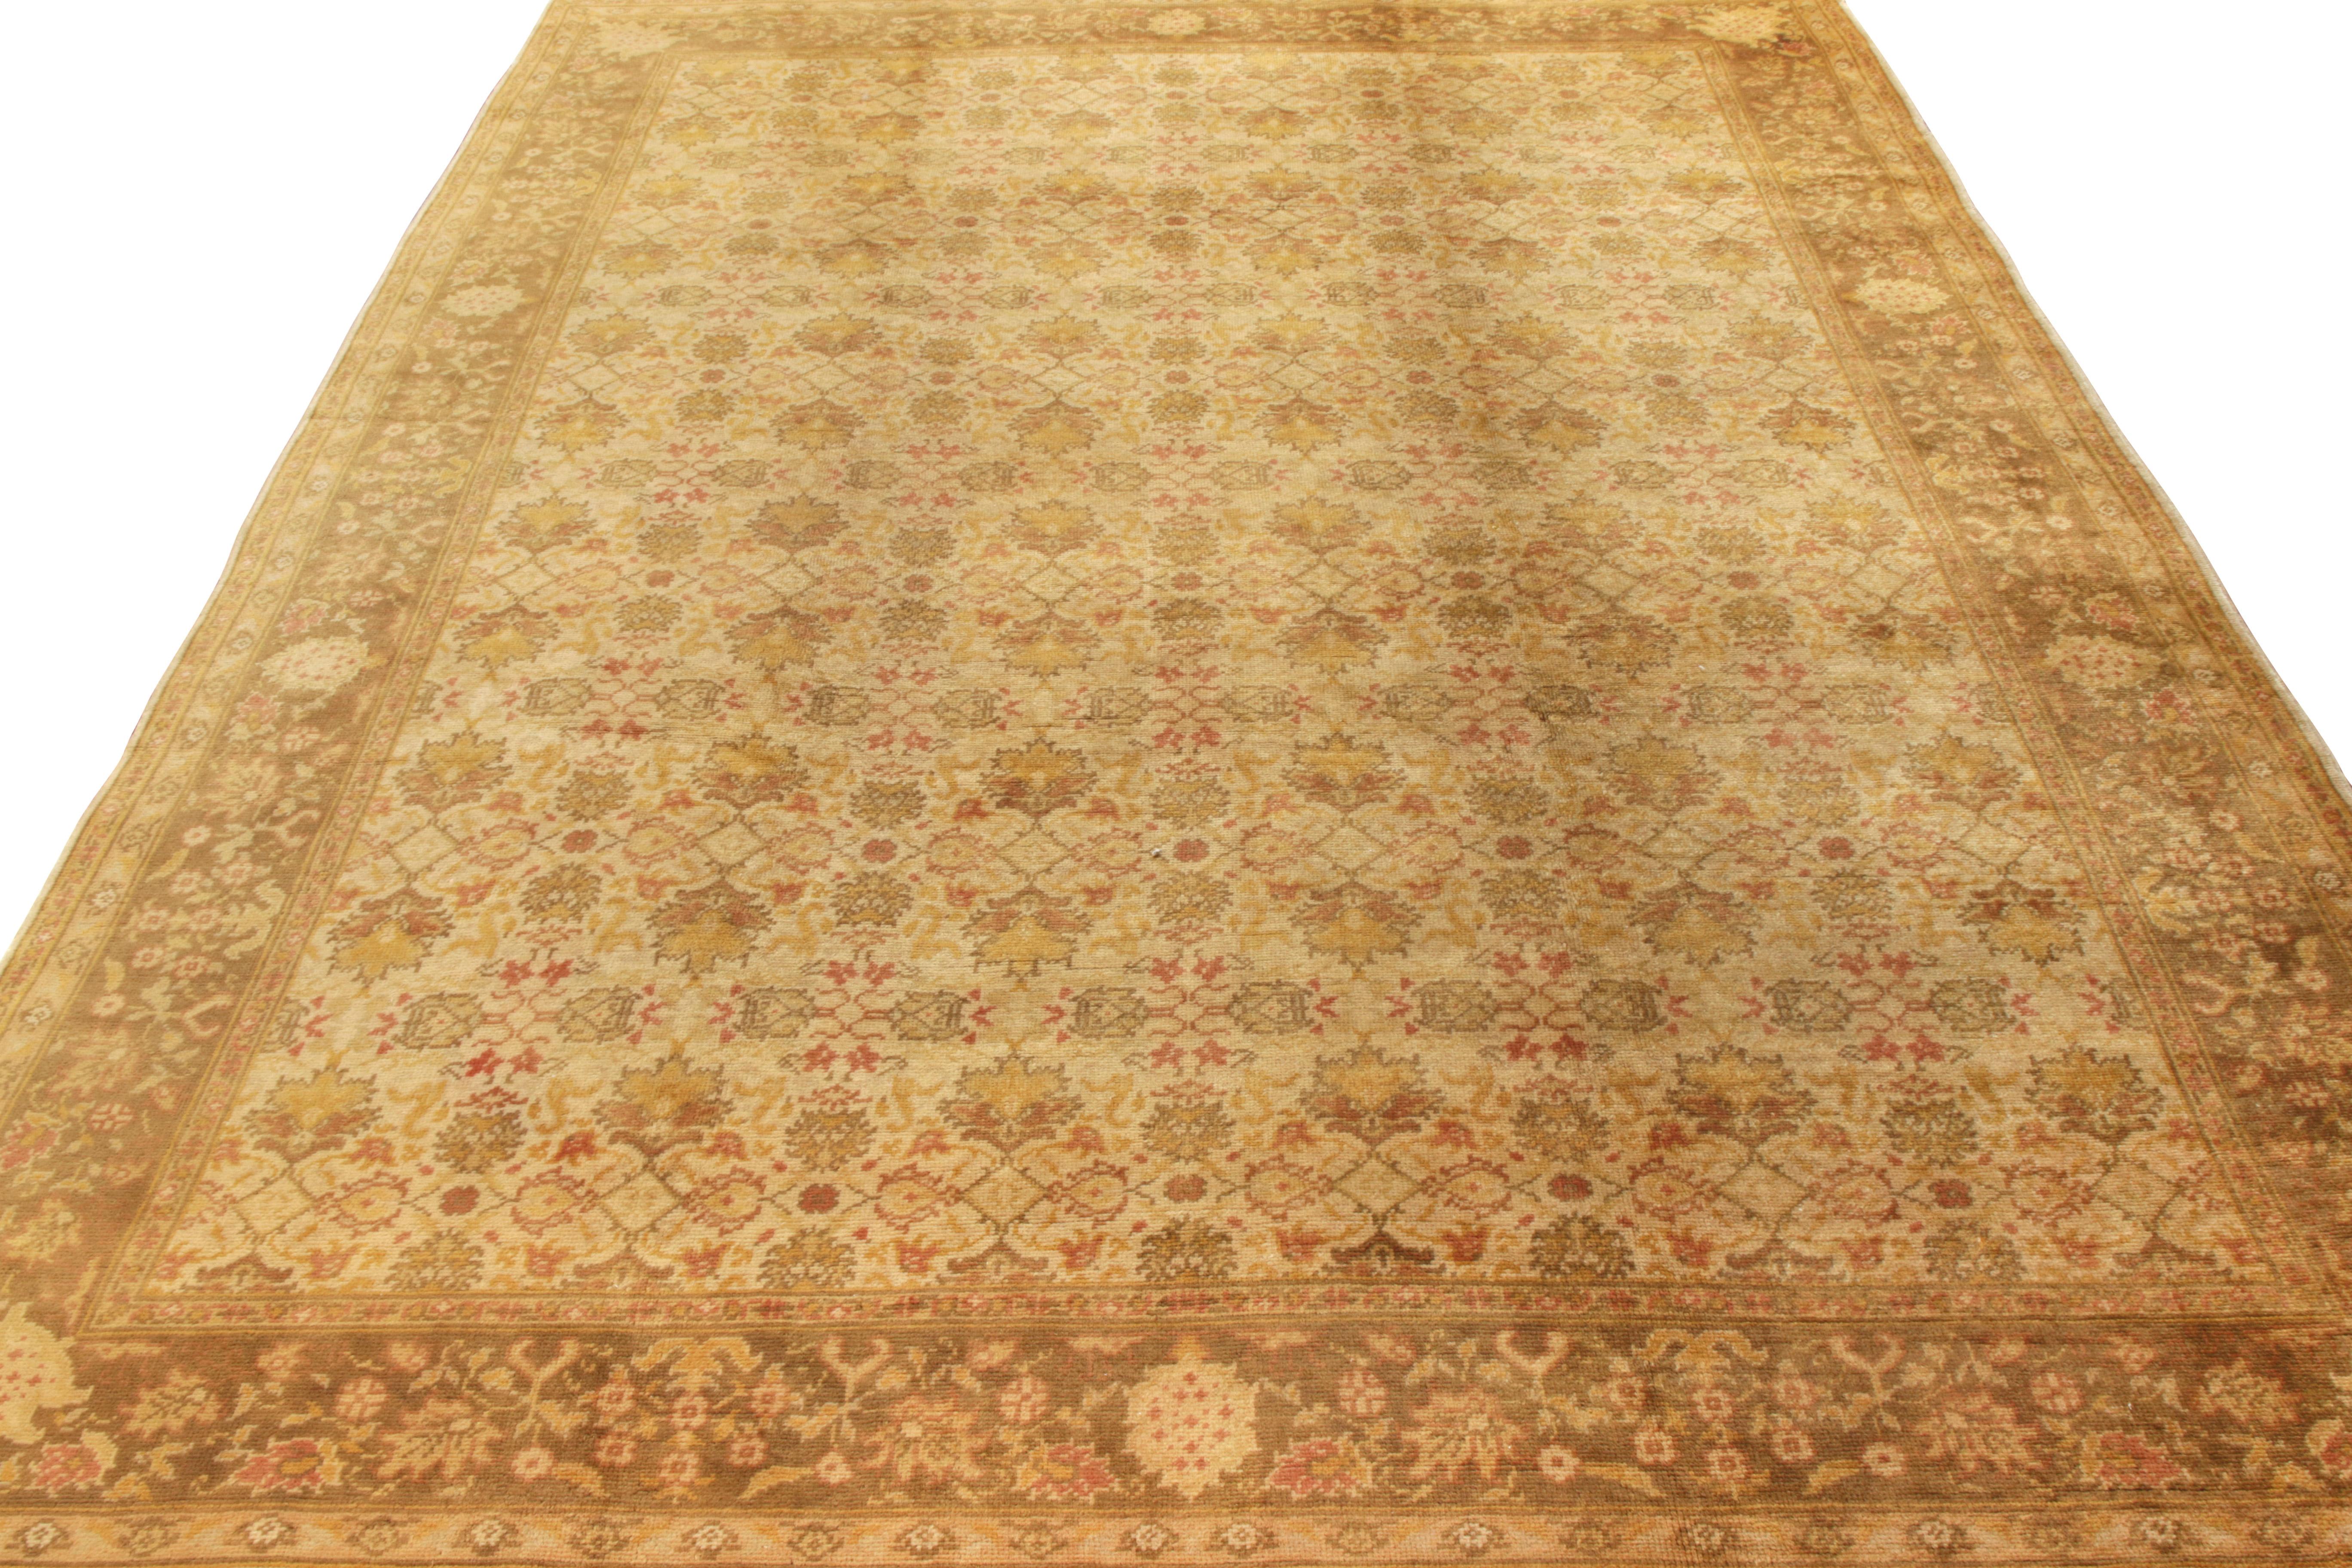 Hand-knotted in wool circa 1950-1960, this 9×13 vintage European rug is a rare mid-century Irish take on Turkish Oushak rugs.

On the Design:

Gold tones underscore an all over floral pattern with beige-brown and light red accents—the latter